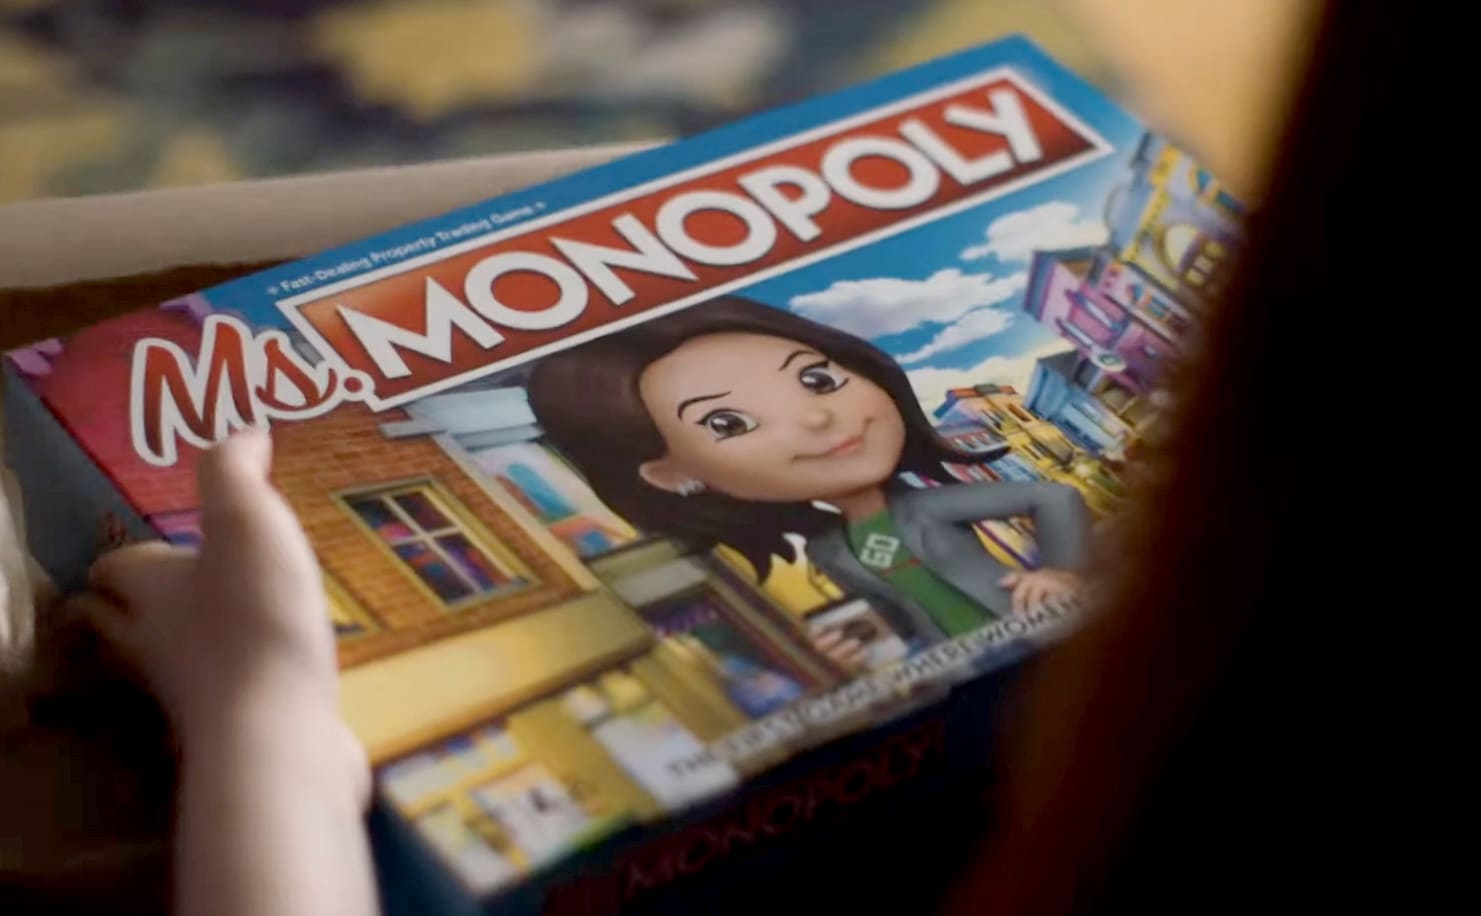 Chick Magnate Hasbro Debuts Ms Monopoly Game Where Women Run The Show,What Are Potstickers Dough Made Of